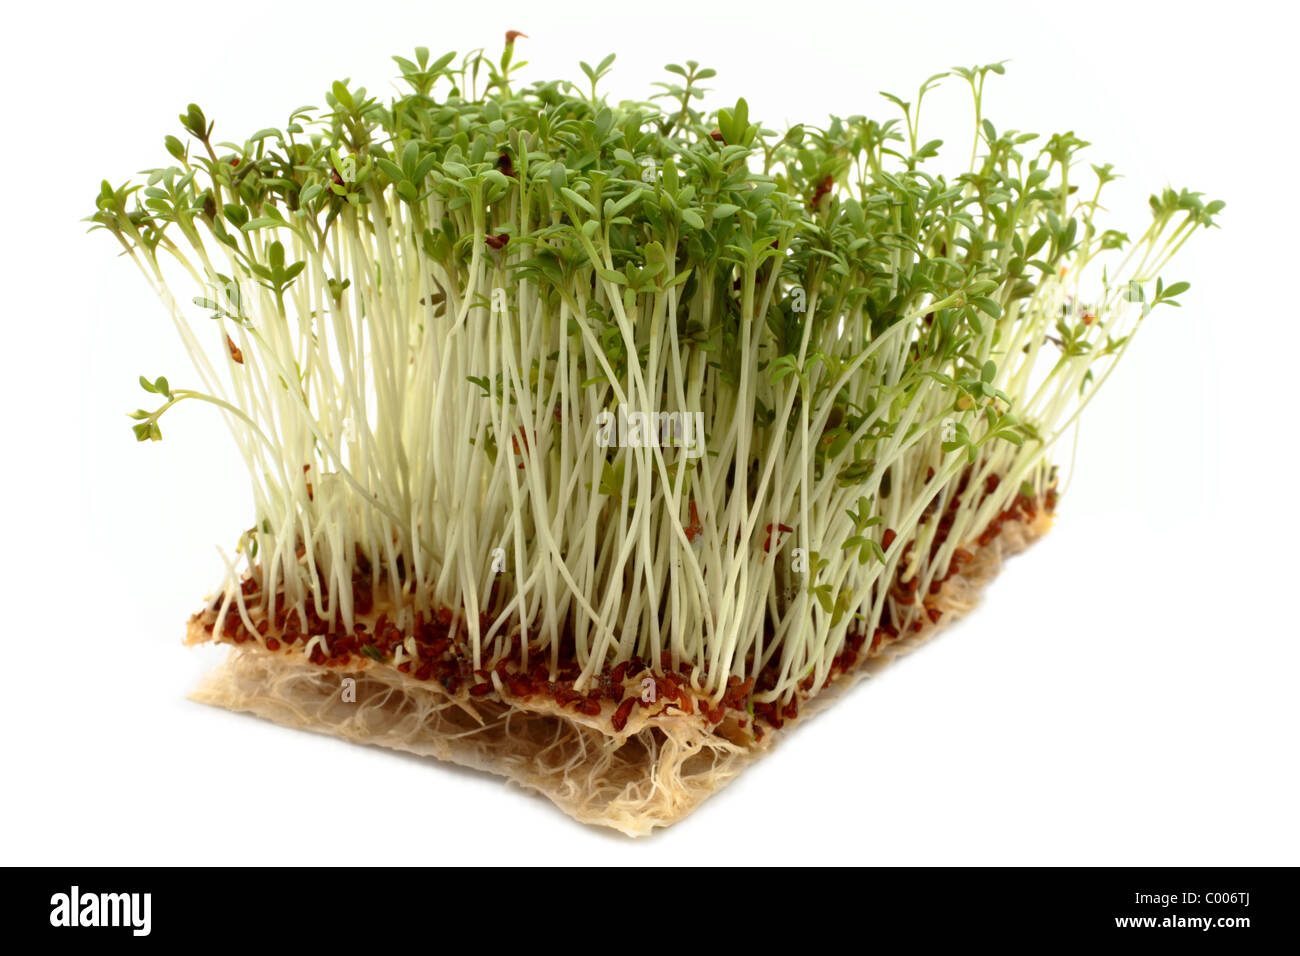 Cress (Lepidium sativum) grown from seed on layers of kitchen roll paper. White background. Stock Photo